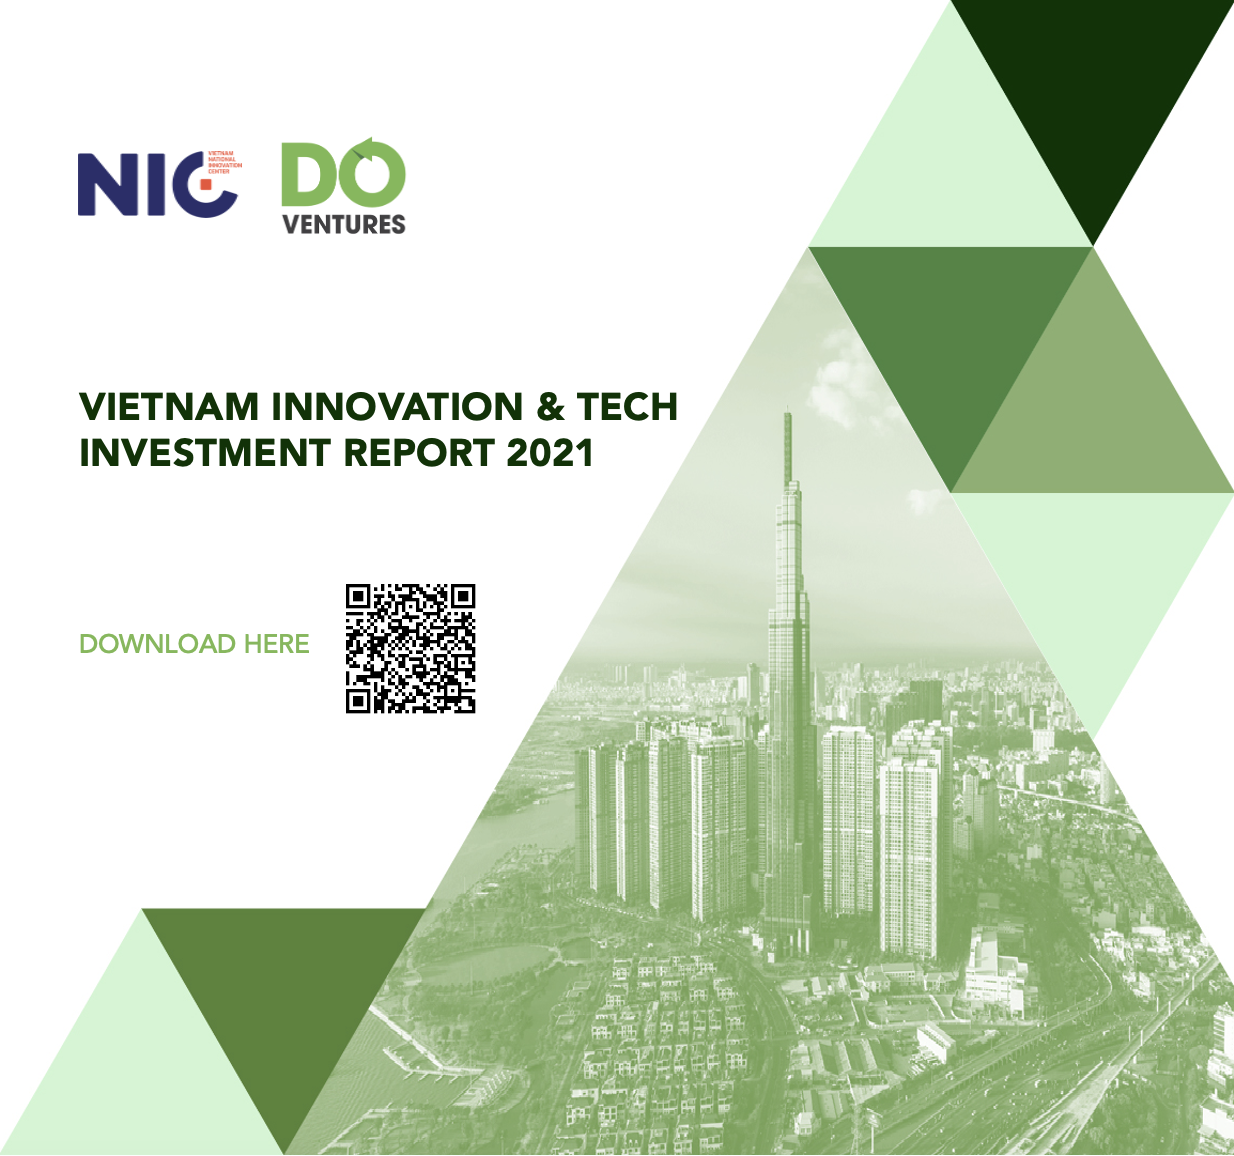 Vietnam Innovation and Tech Investment Report FY2021 out now